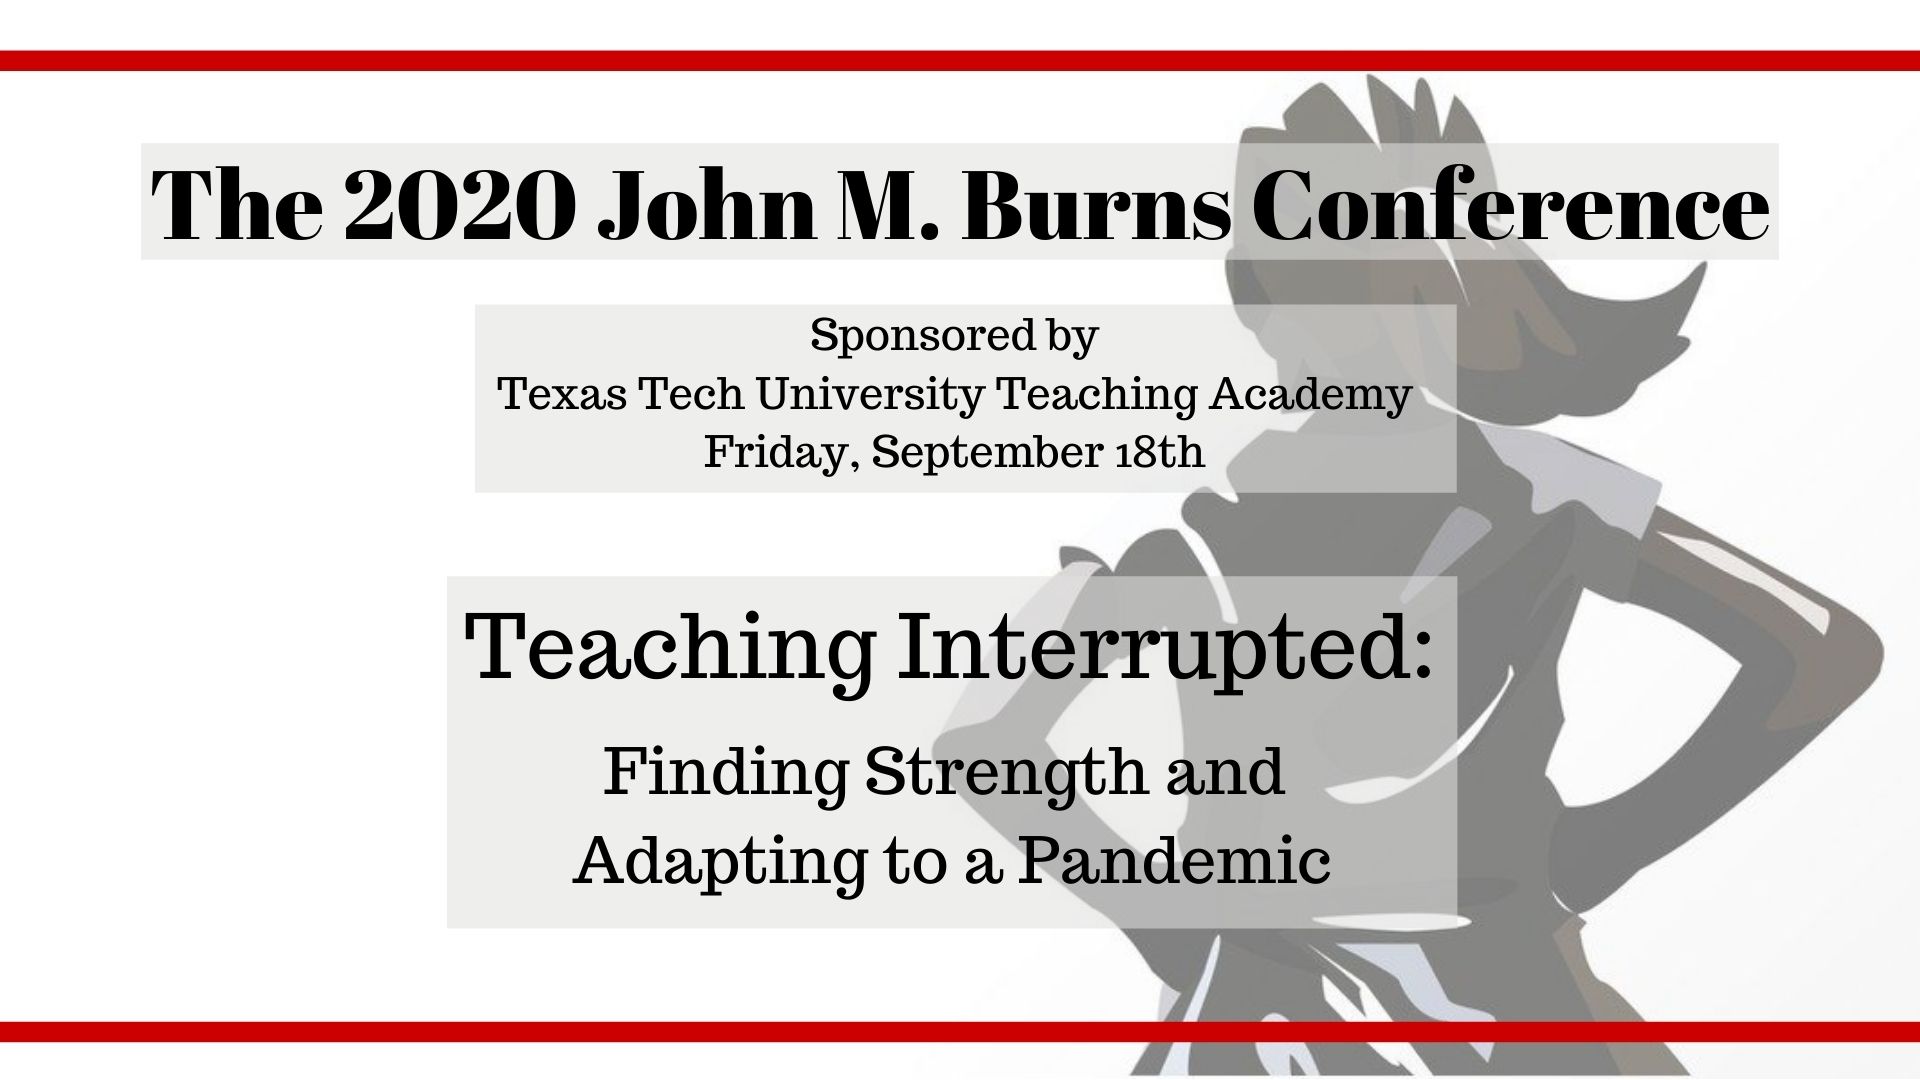 The John M. Burns Conference on The Scholarship of Teaching and